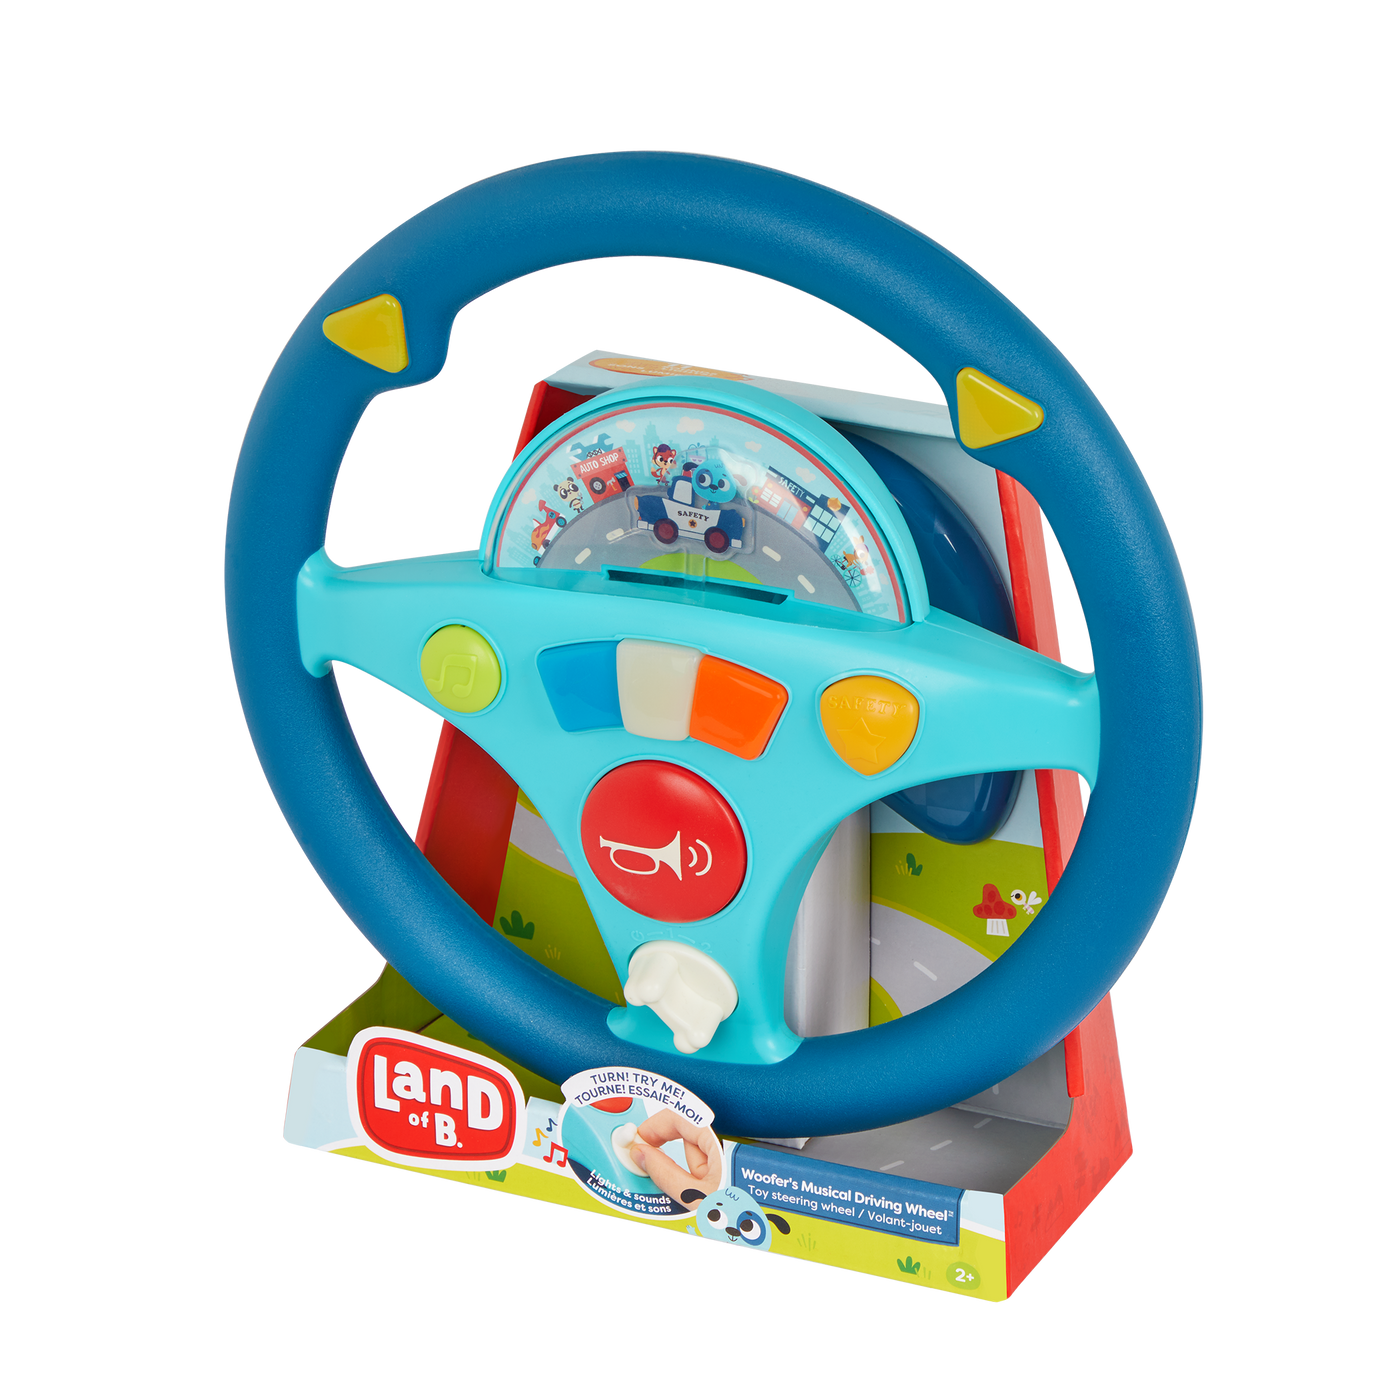 Toy steering wheel with light-up buttons.